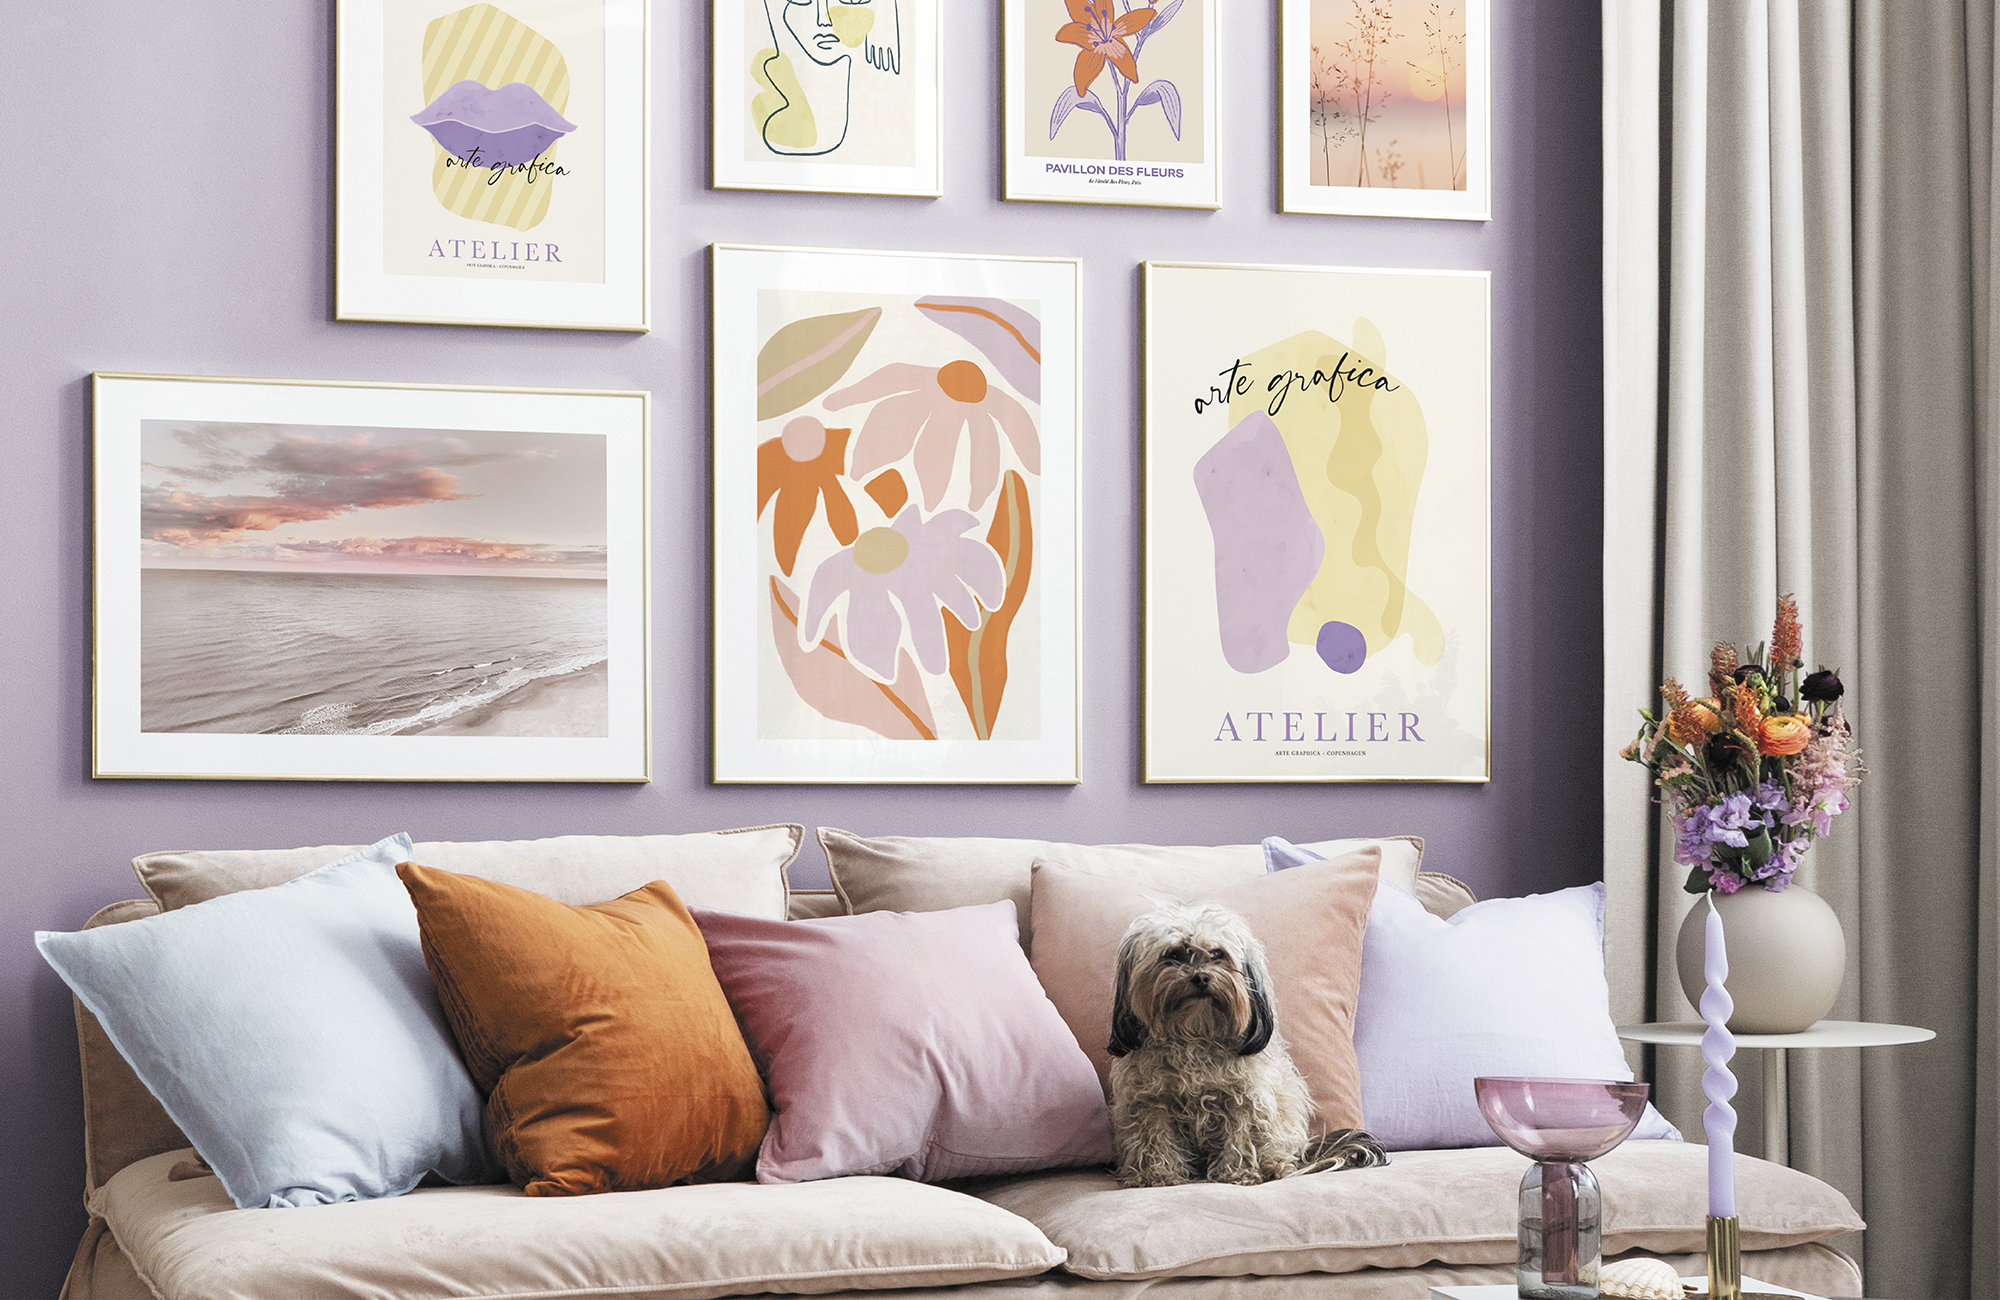 A modern living room idea by Desenio with pastel-themed gallery wall and cushions on sofa